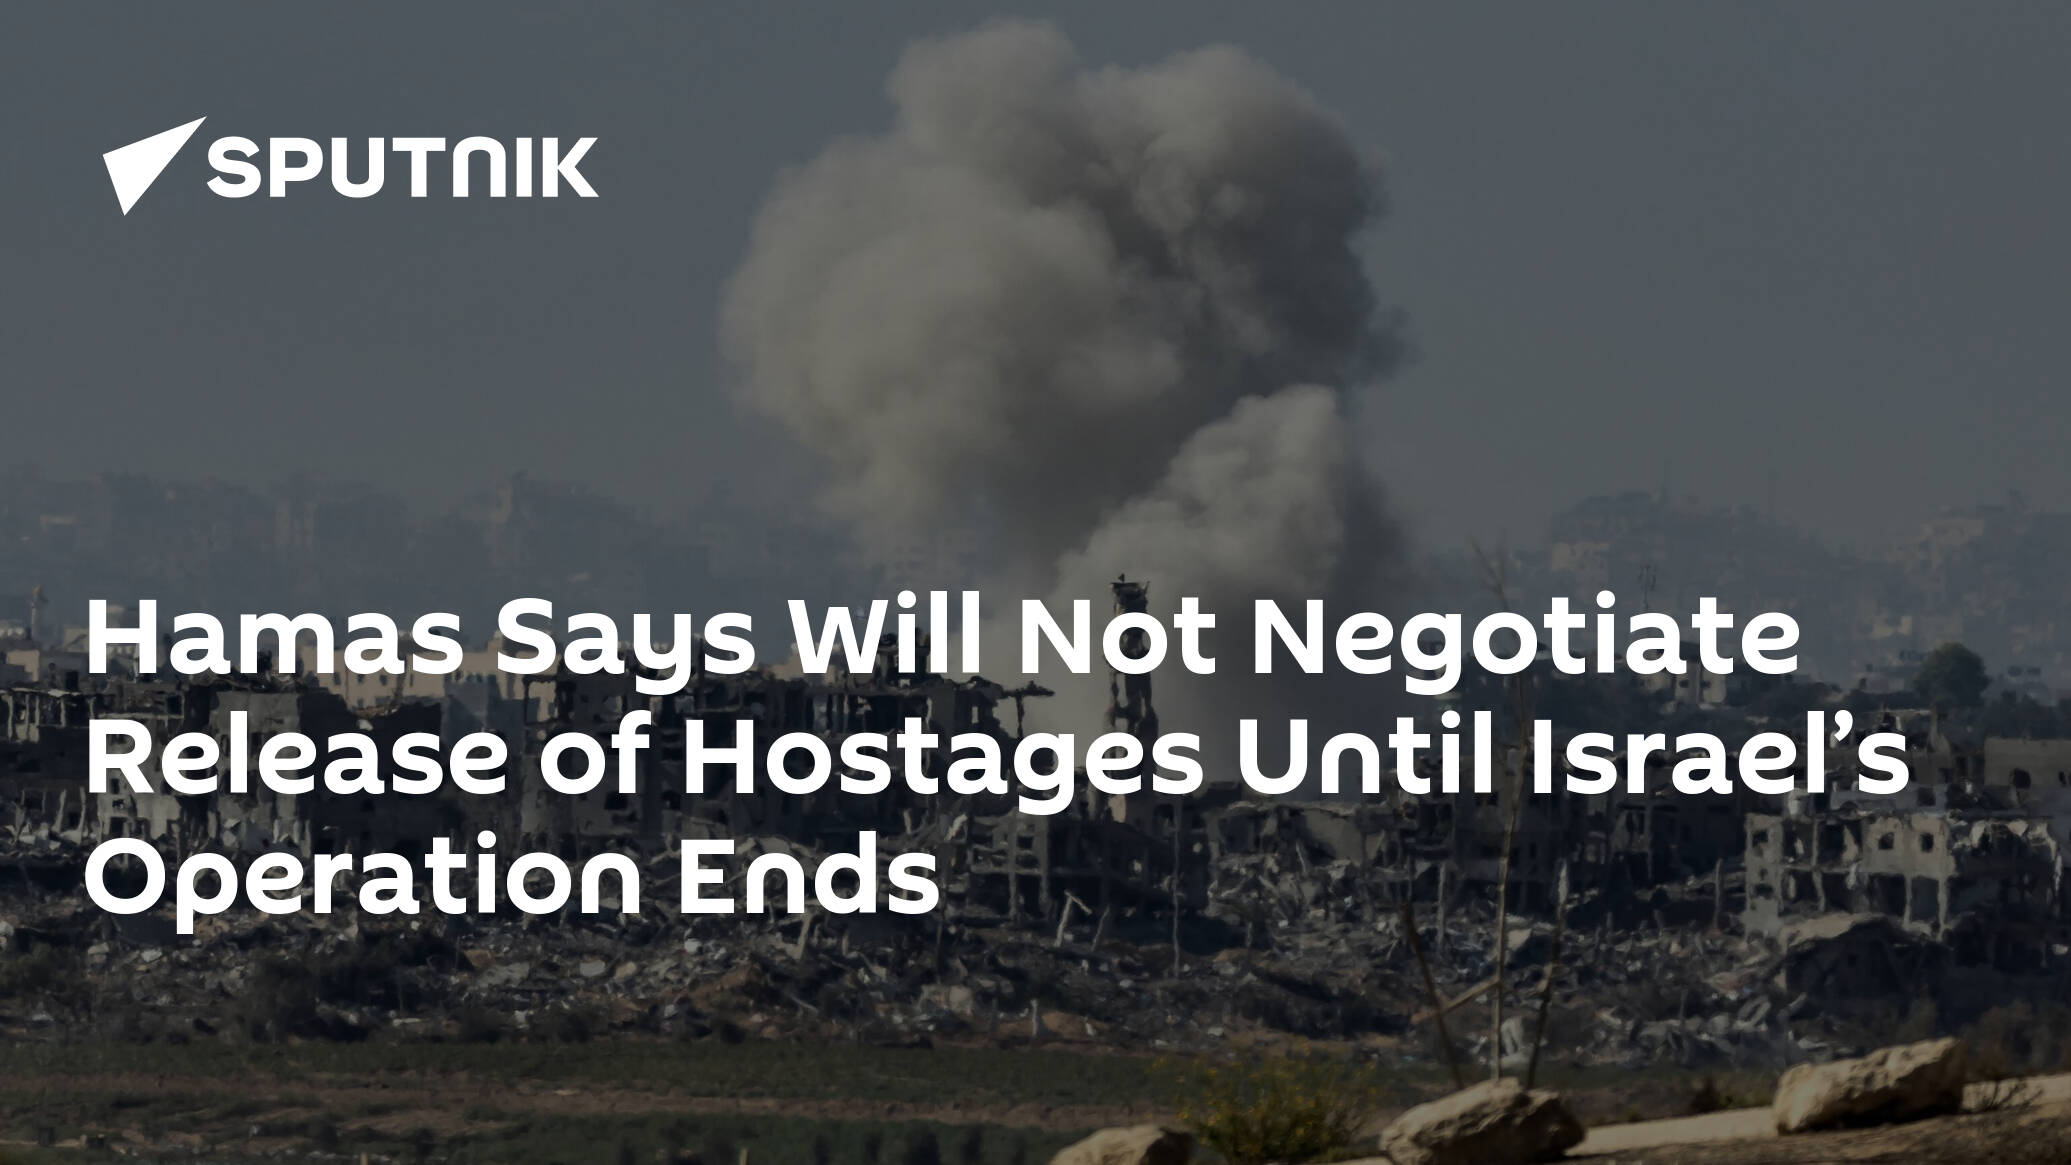 Hamas Says Will Not Negotiate Release of Hostages Until Israel’s Operation Ends